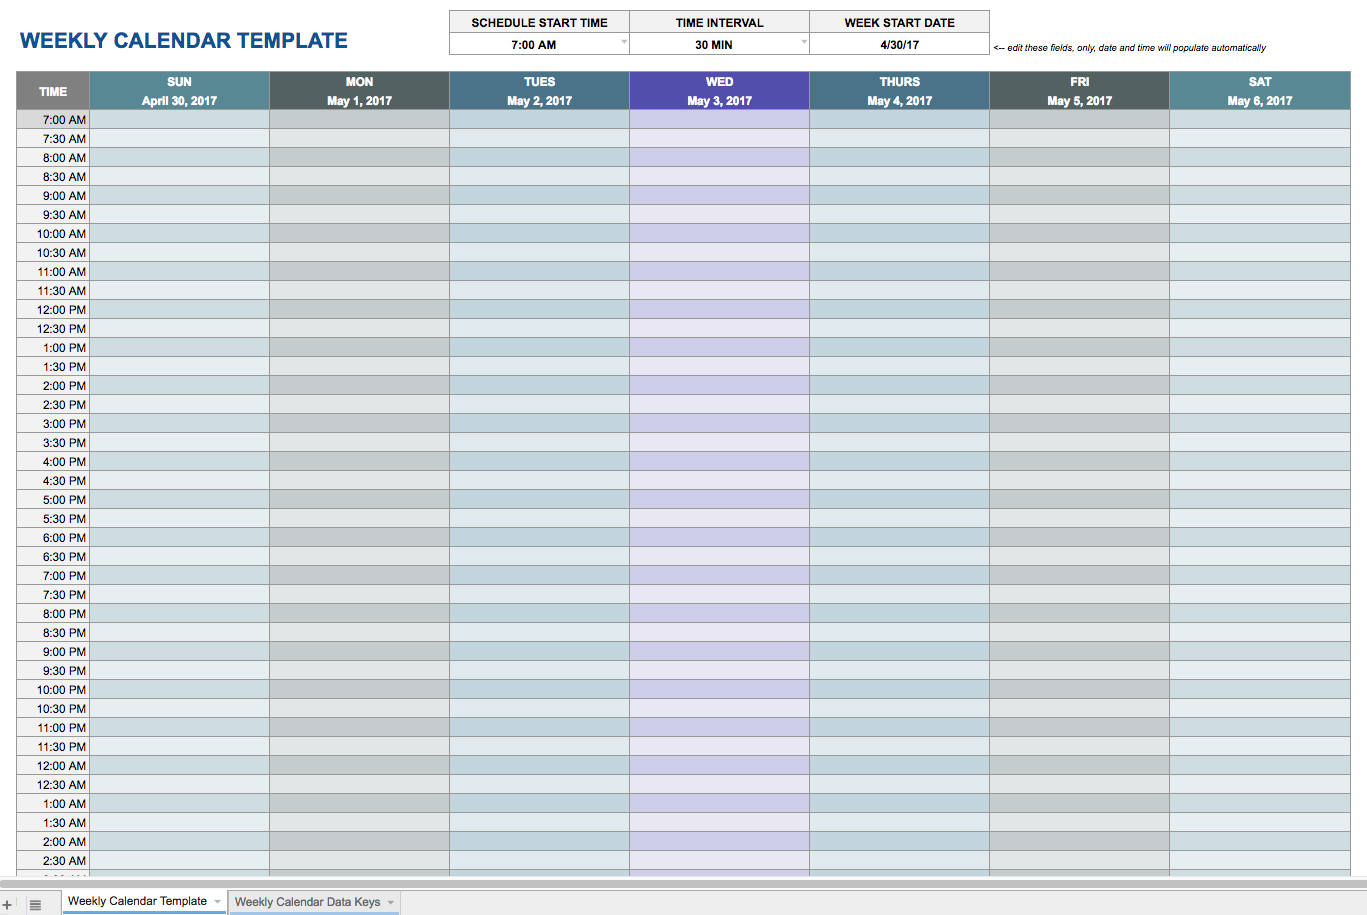 Weekly Schedule Template Google Docs Planner Template Free